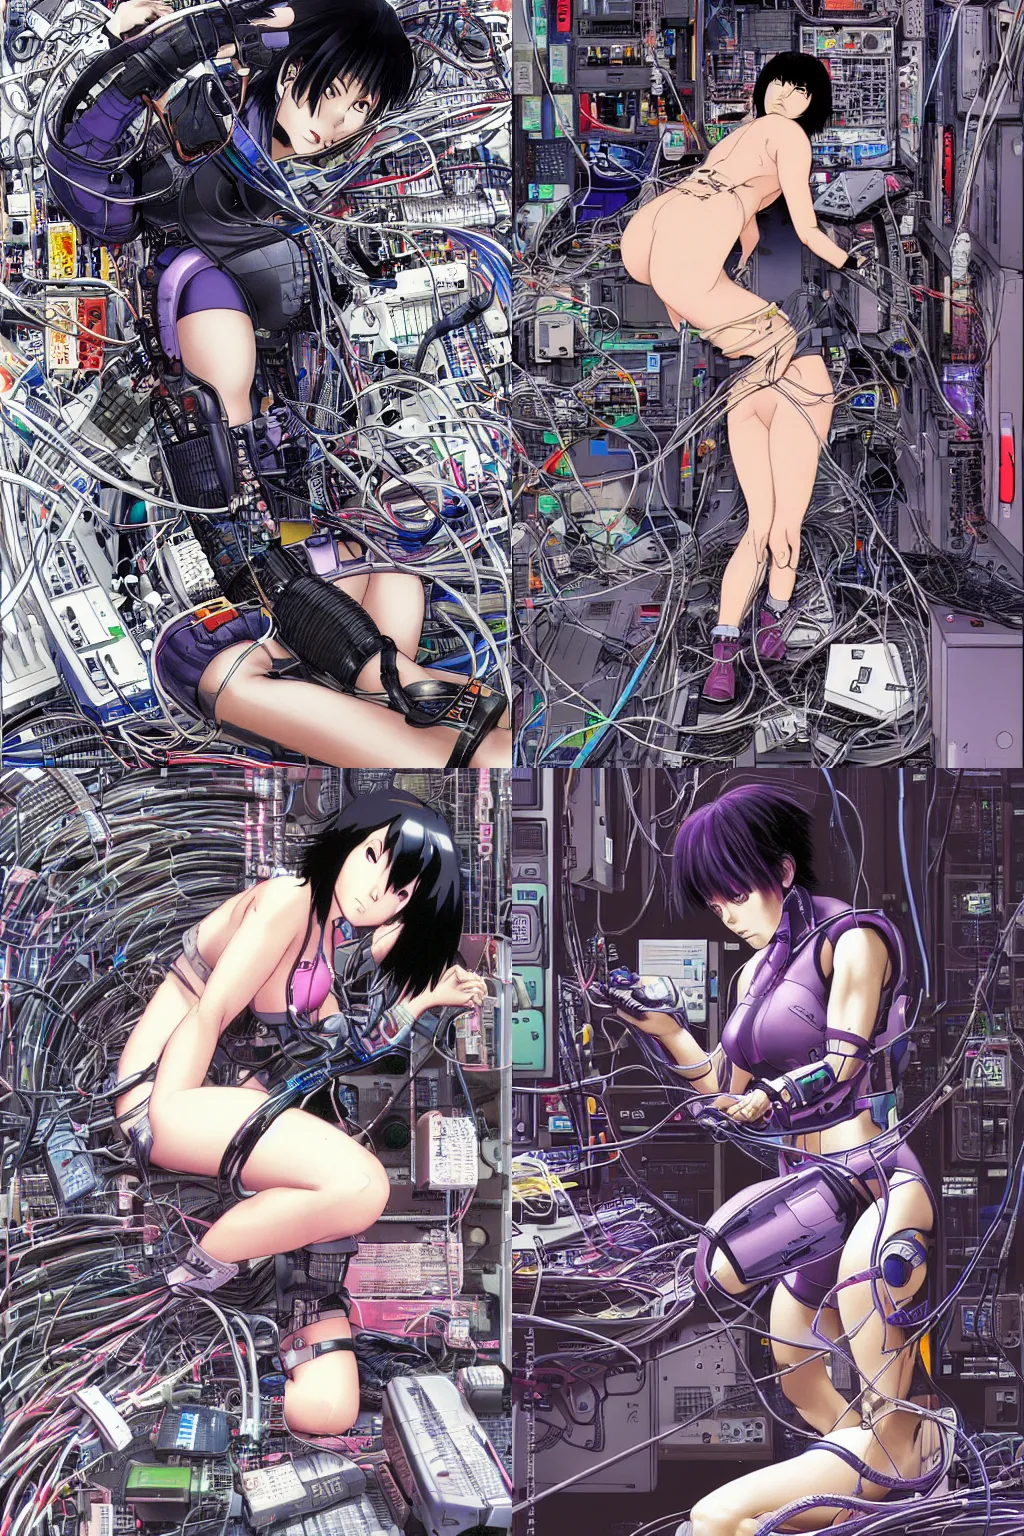 Prompt: motoko kusanagi kneeling on the floor in a tech lab, with a mess of wires and cables coming out of her head and backside, by masamune shirow and katsuhiro otomo, illustration, cyberpunk, hyper-detailed, colorful, complex, intricate